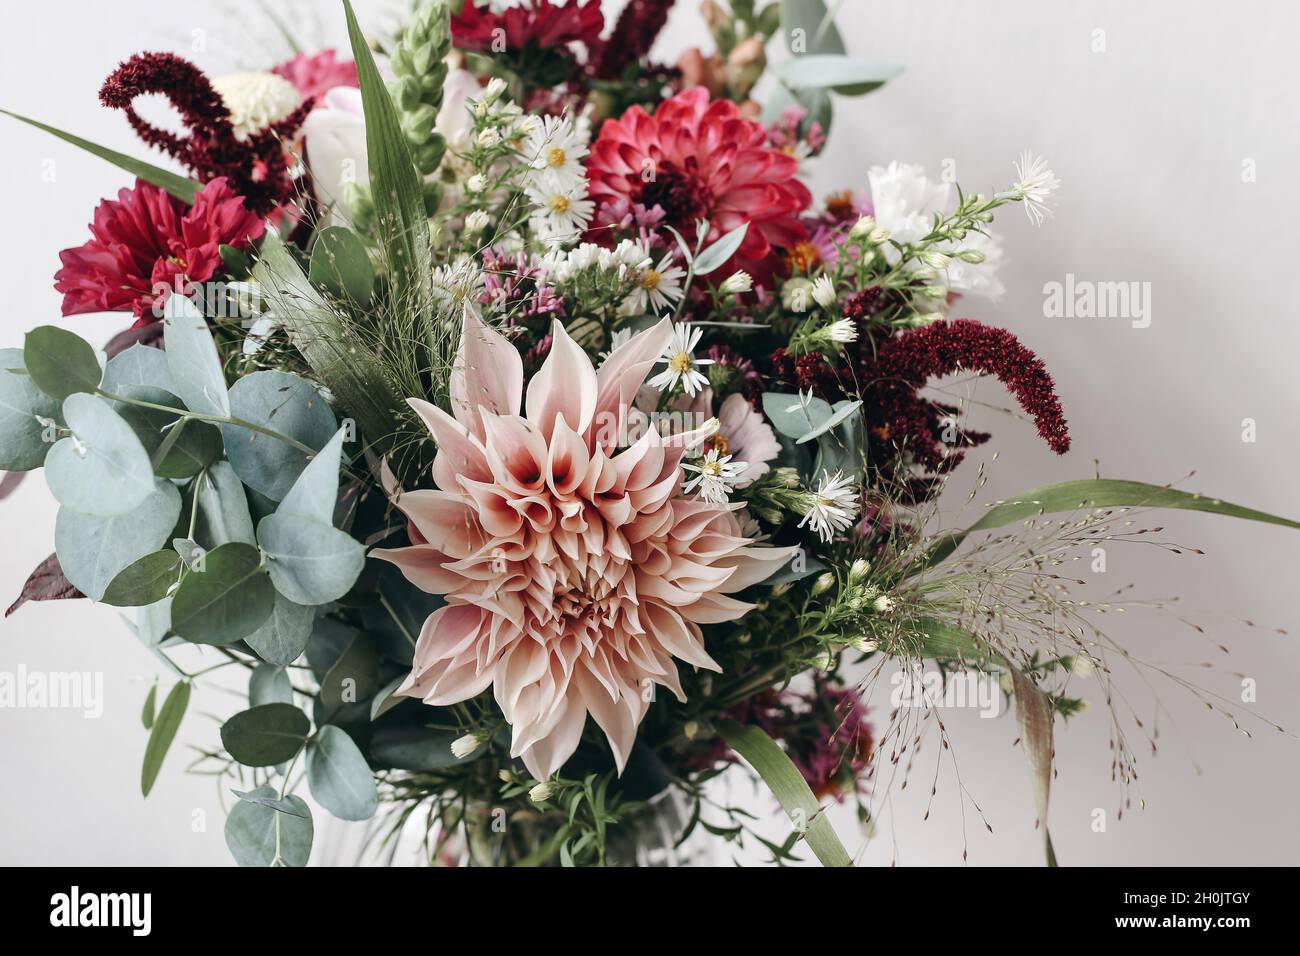 Closeup of colorful flowers. Moody autumn wedding or birthday bouquet. Pink and burgundy dahlia, cosmos and aster flowers. Amaranthus and eucalyptus Stock Photo